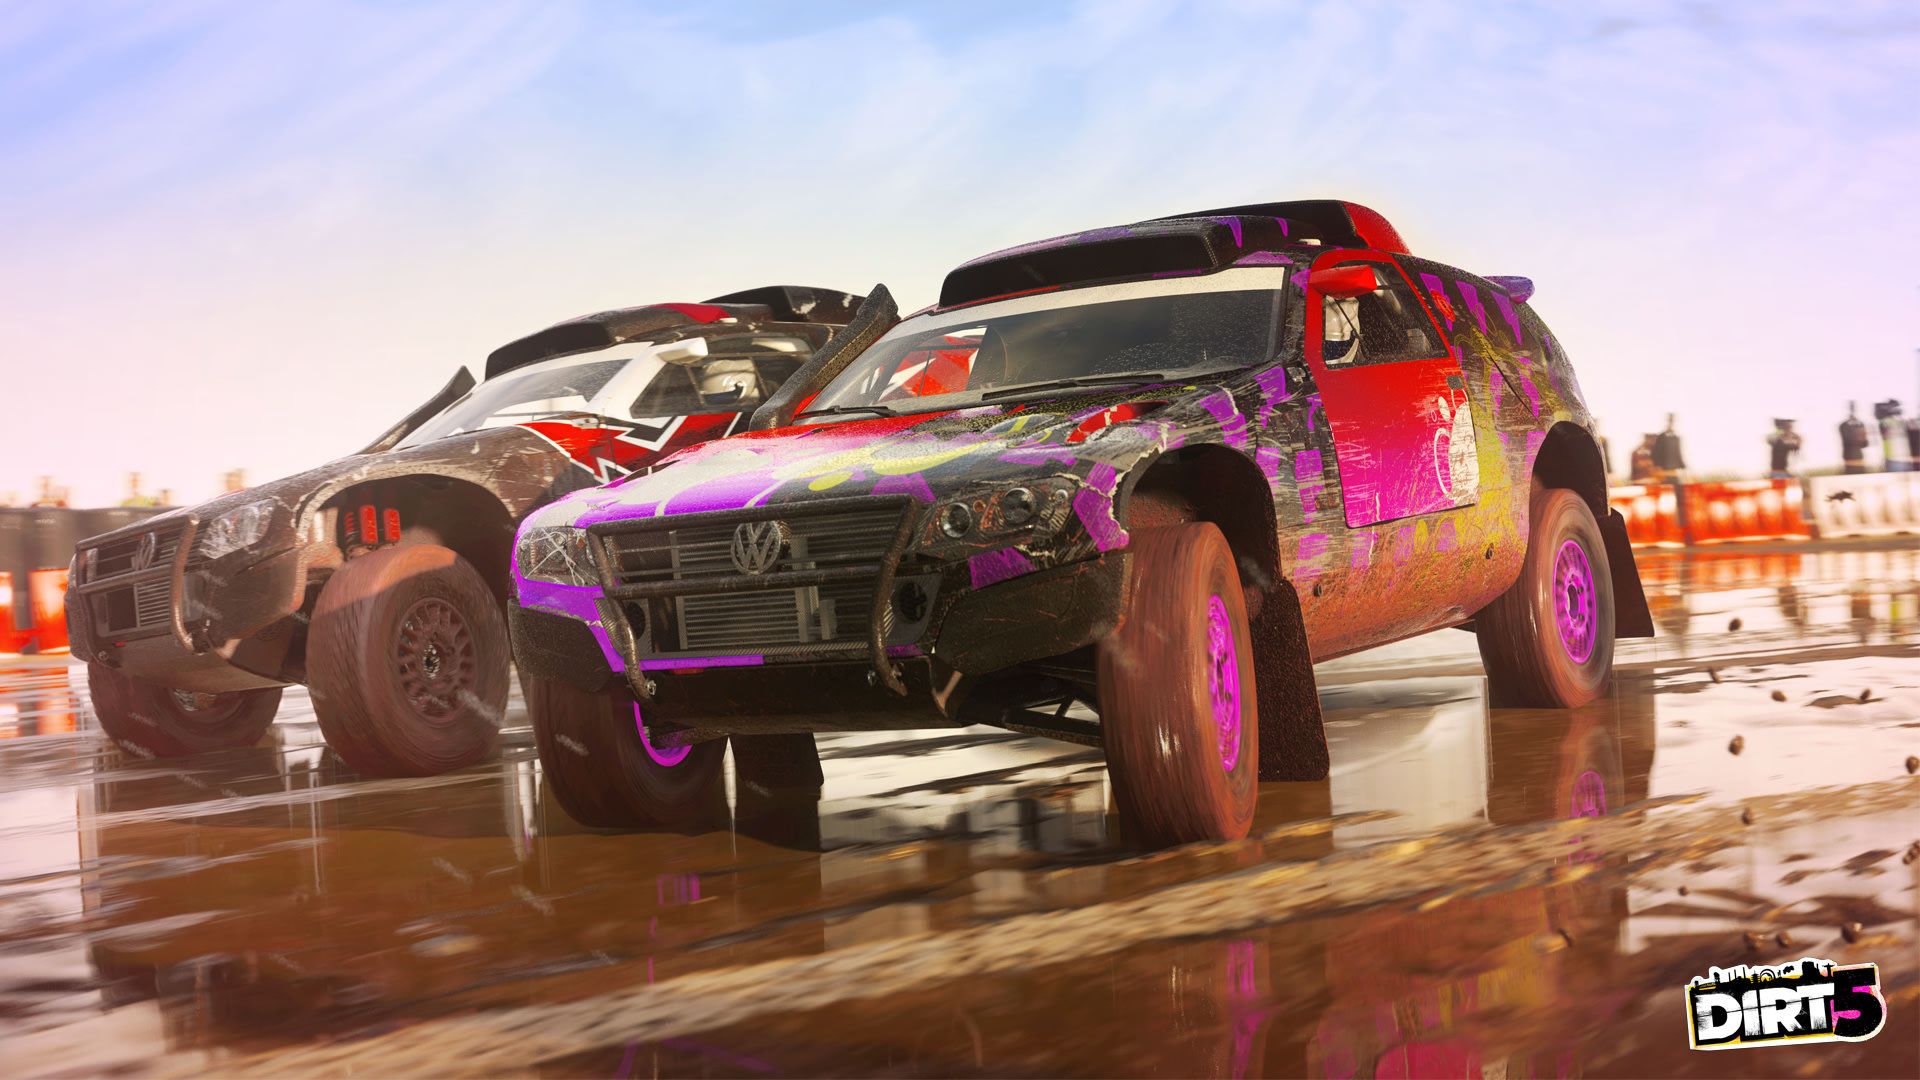 New DiRT 5 2020 Wallpaper, HD Games 4K Wallpaper, Image, Photo and Background